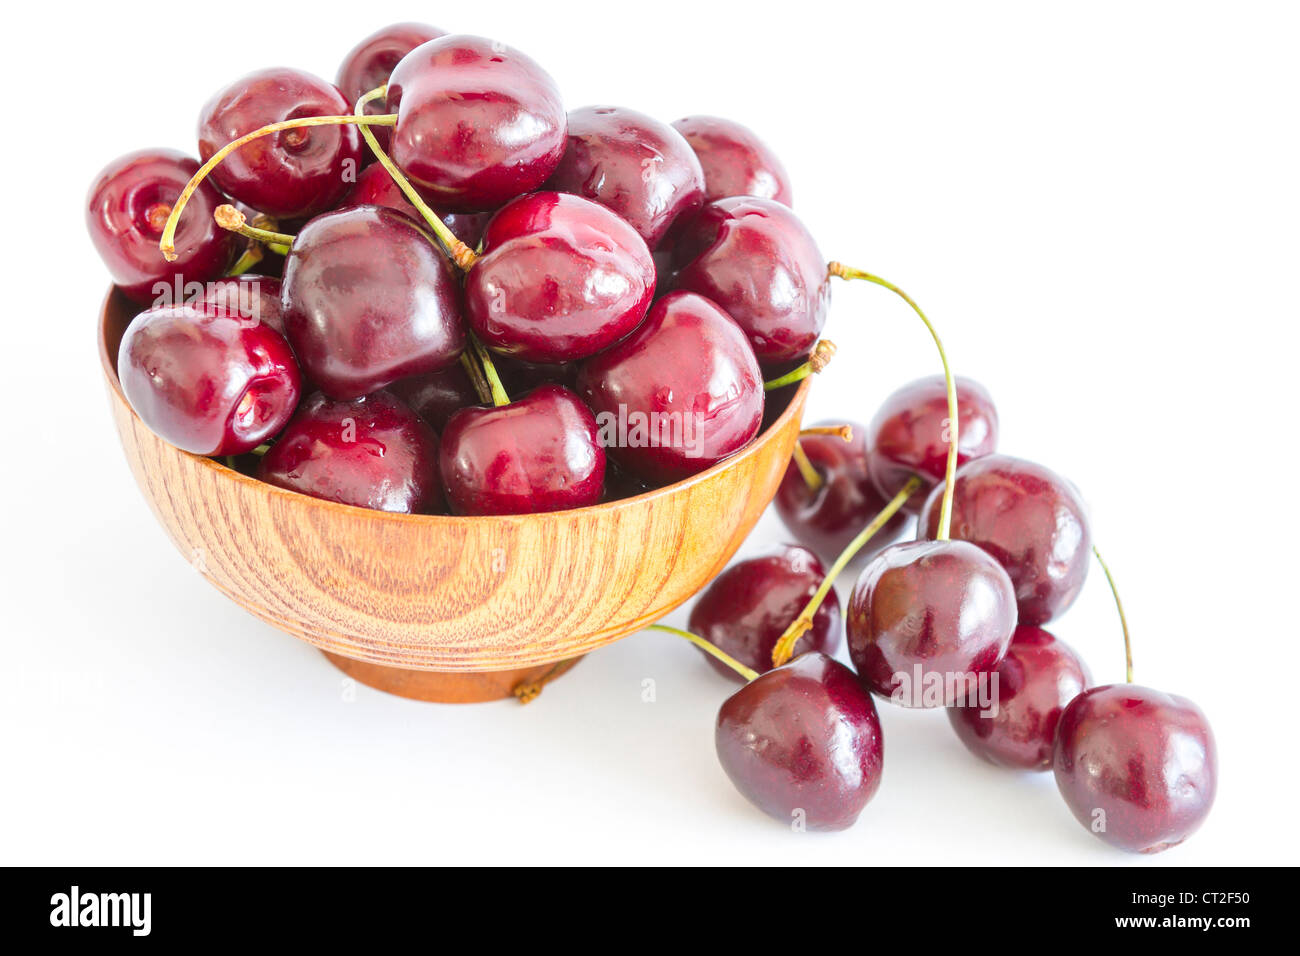 Cherry in wooden bowl isolated on white background Stock Photo